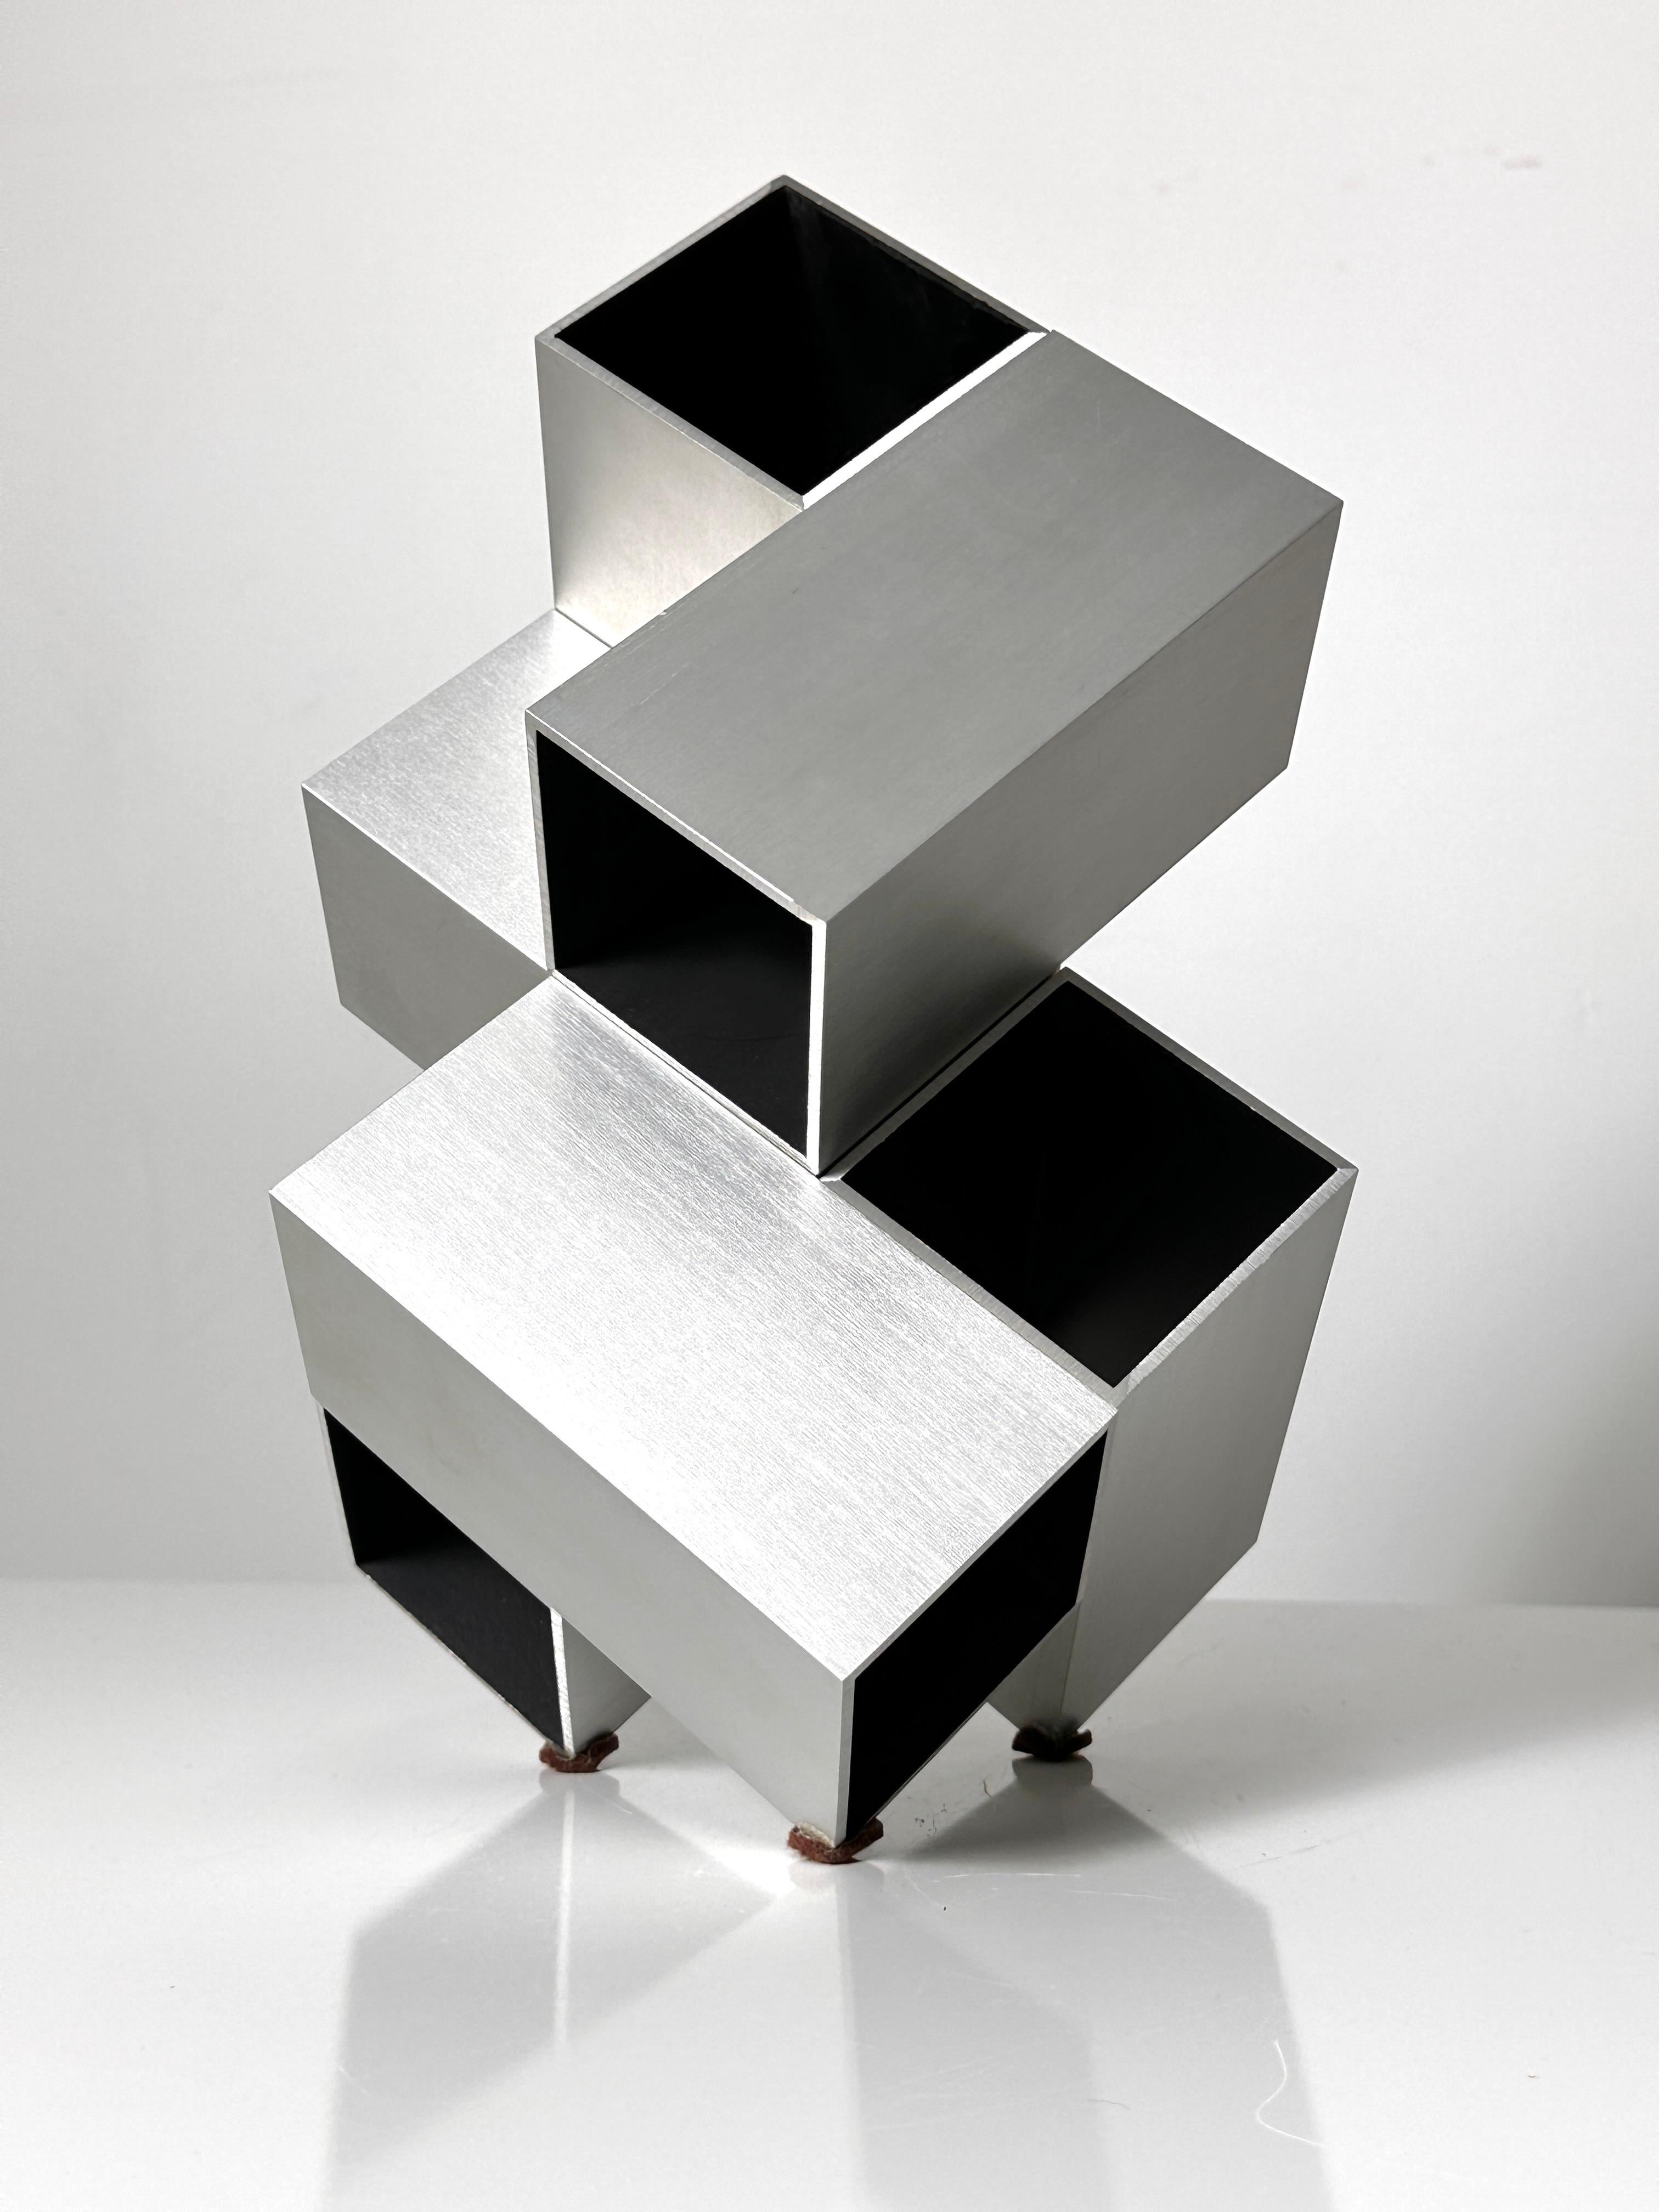 Modular Cube sculpture by Israeli artist Kosso Eloul 1920-1995

Two pieces in brushed aluminum with black painted wood interior
Purchased in Toronto by the original owner circa 1970s  

Overall dimensions
9.5 inch width
9.5 inch depth
14.5 inch